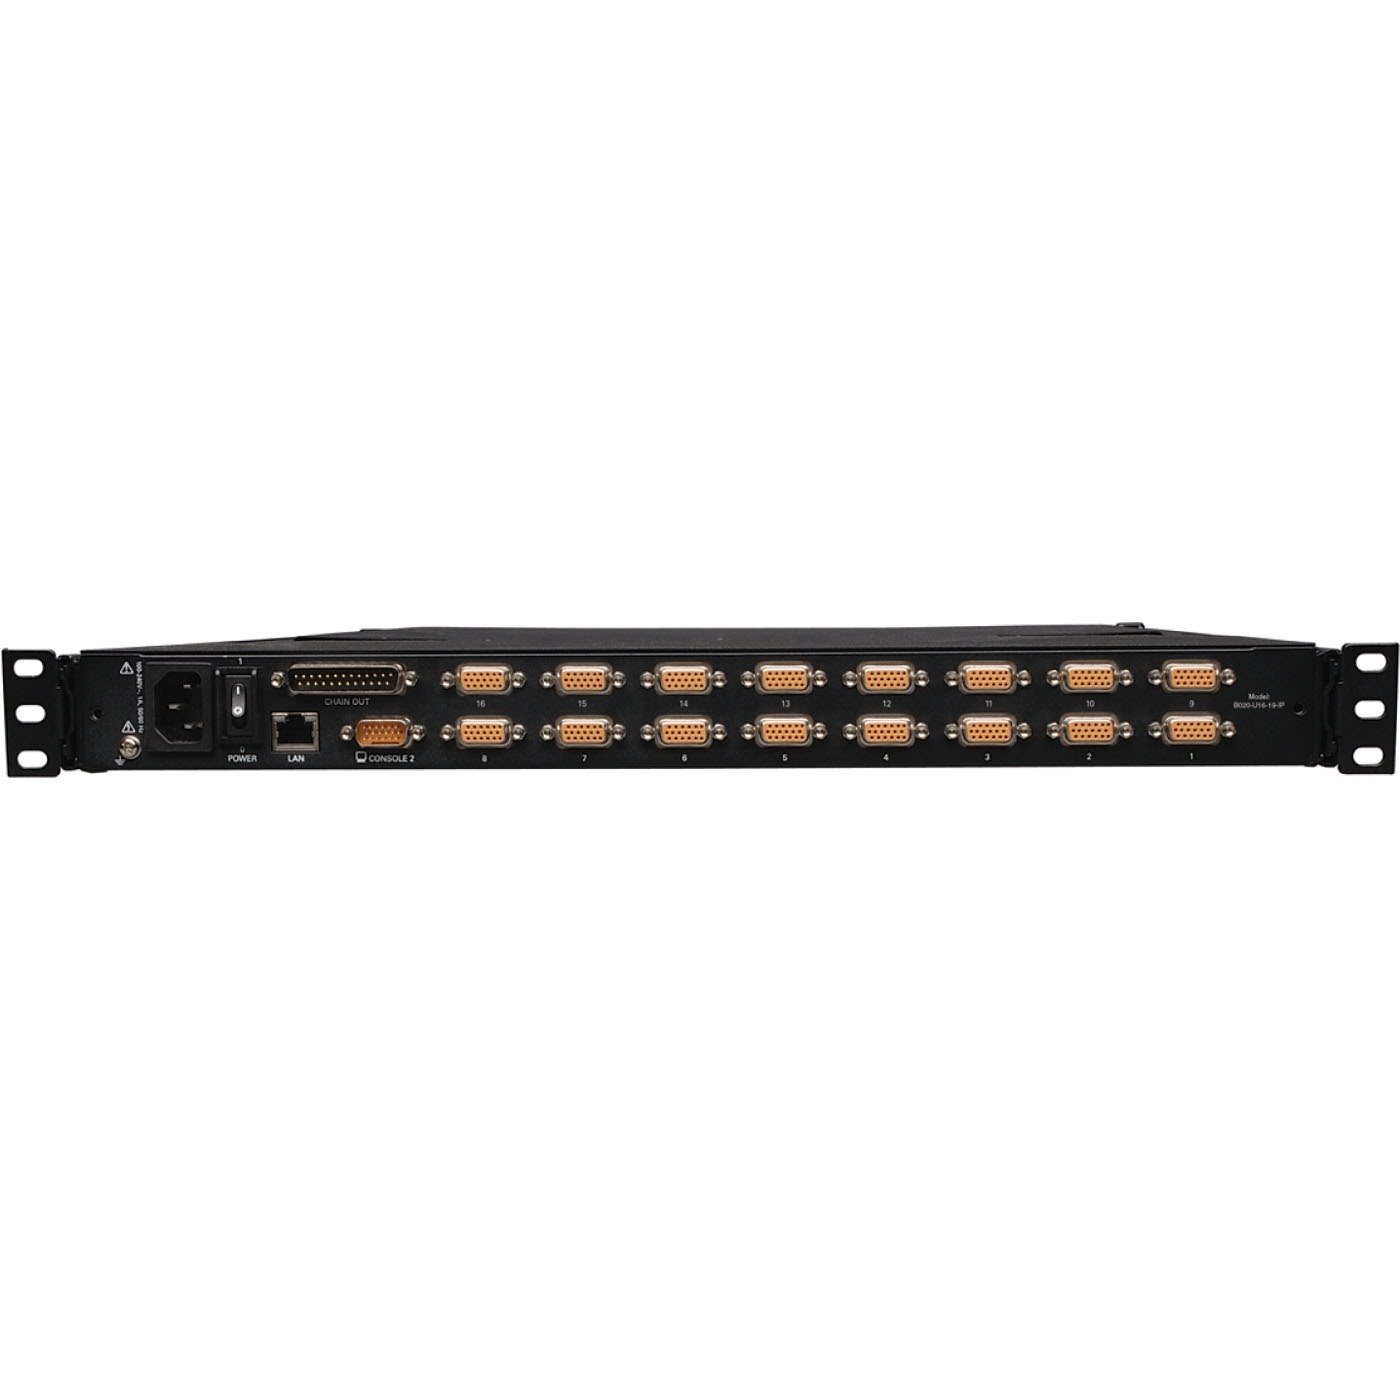 Tripp Lite by Eaton NetDirector 16-Port 1U Rack-Mount Console IP KVM Switch with 19 in. LCD